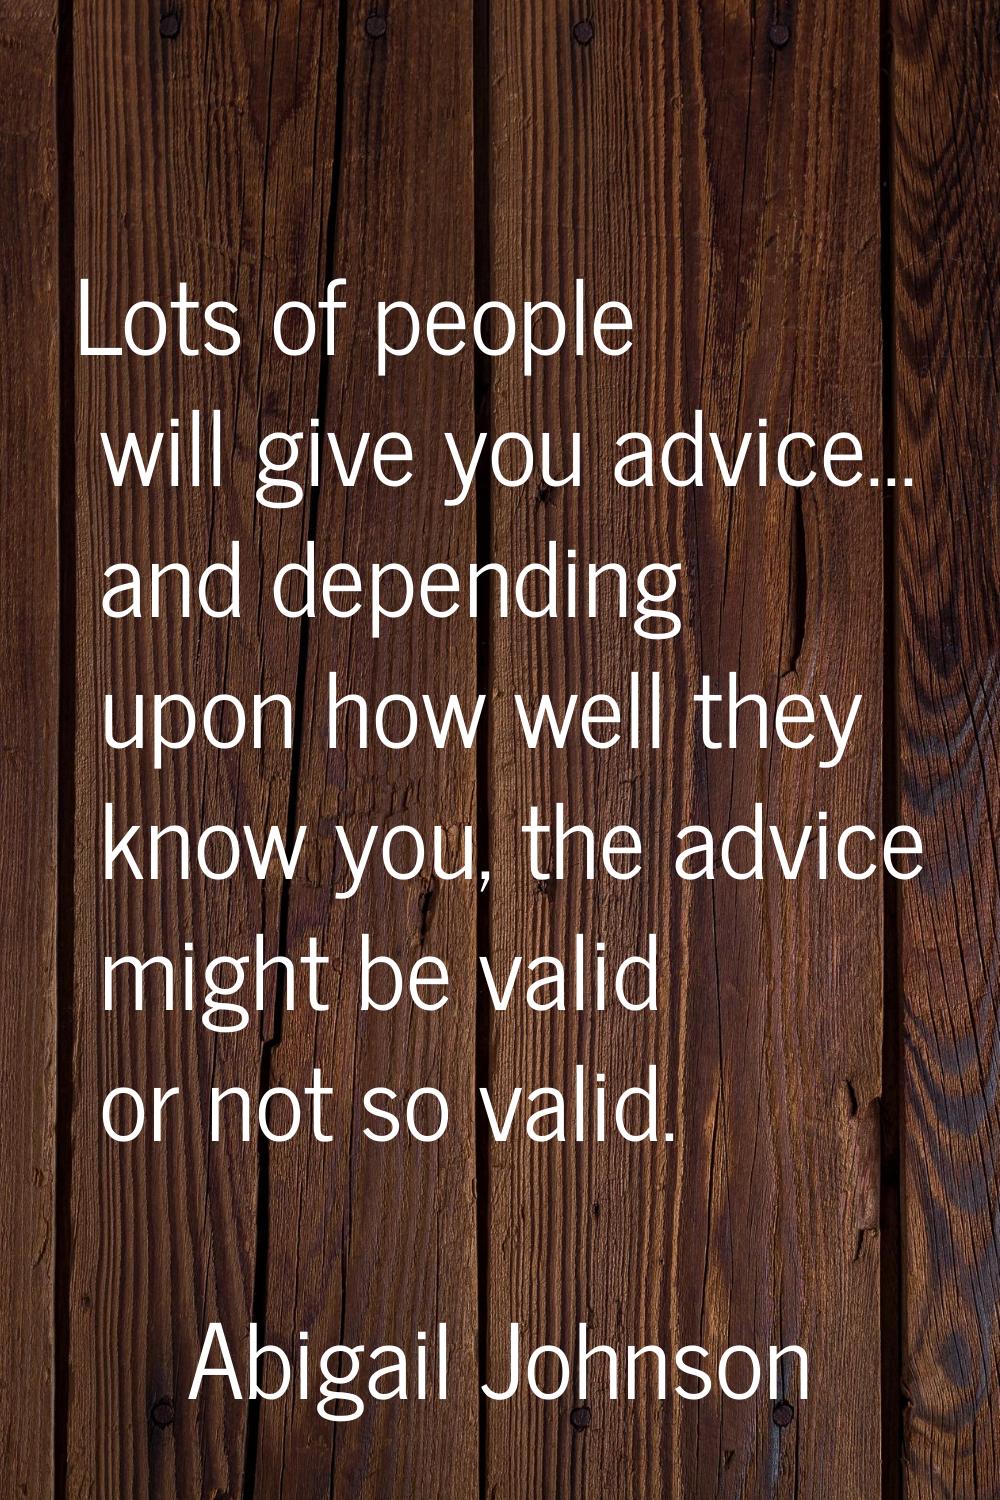 Lots of people will give you advice... and depending upon how well they know you, the advice might 